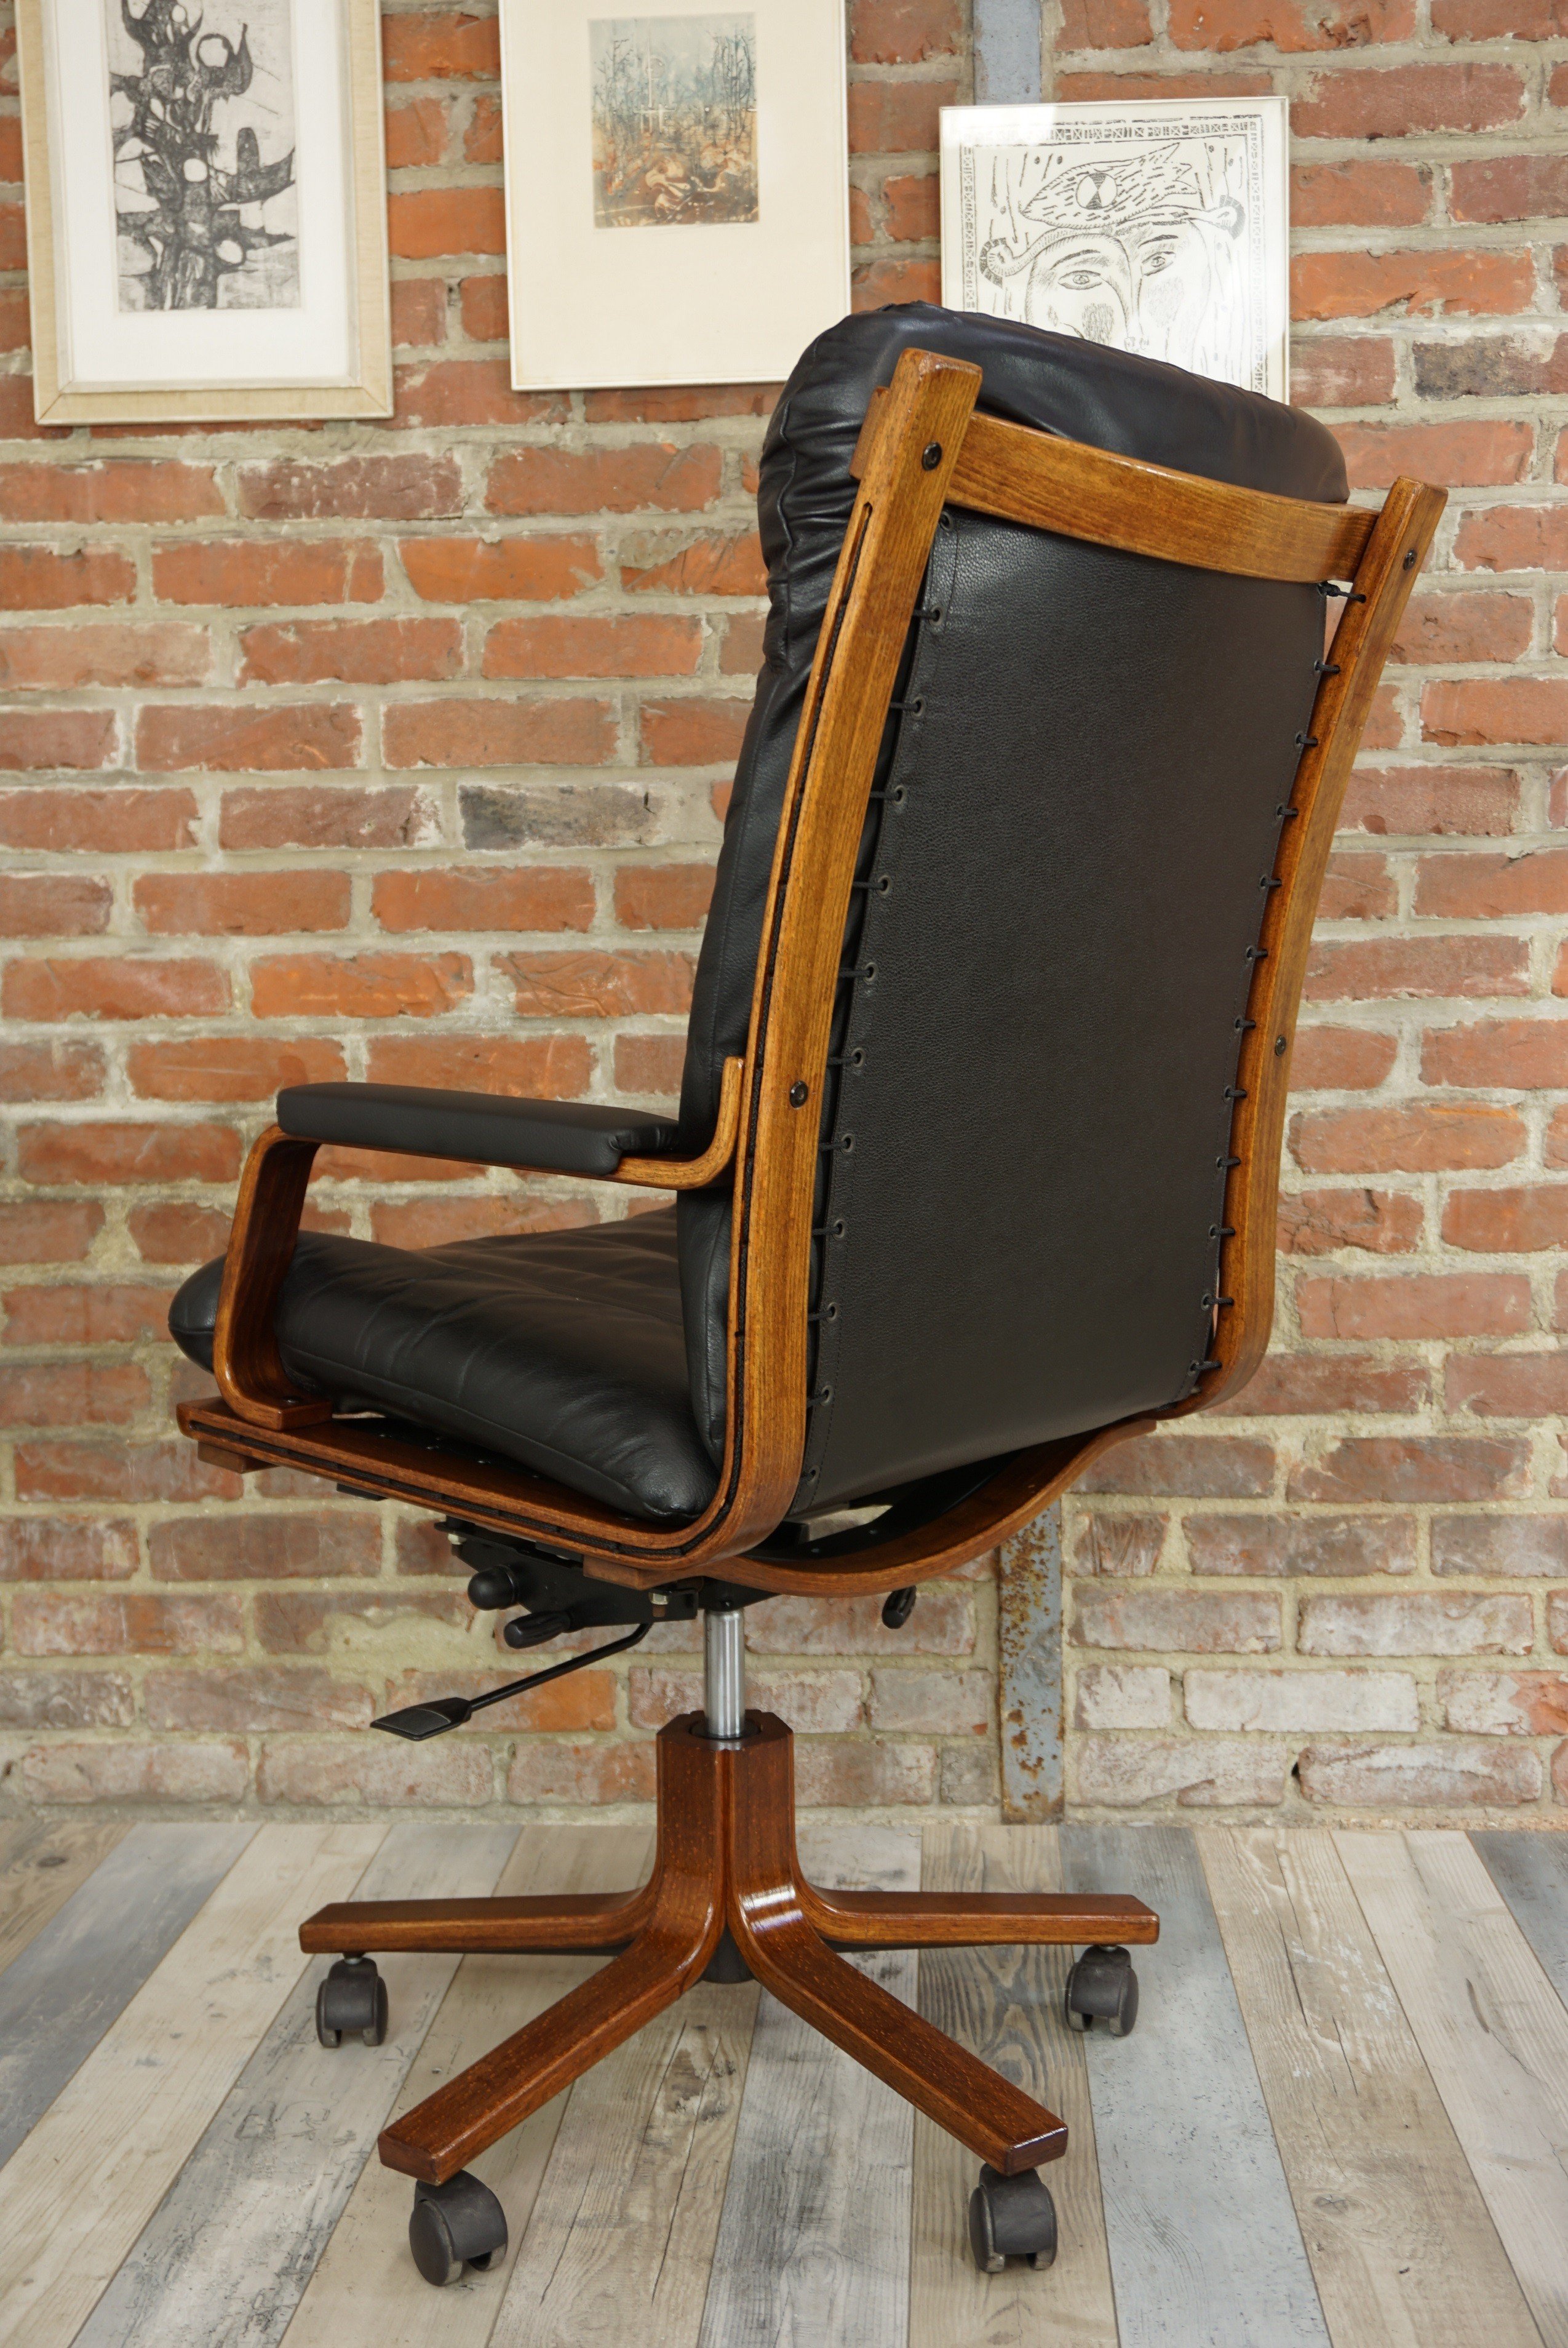 Vintage swivelling office chair in wood and leather - 1970s - Design Market